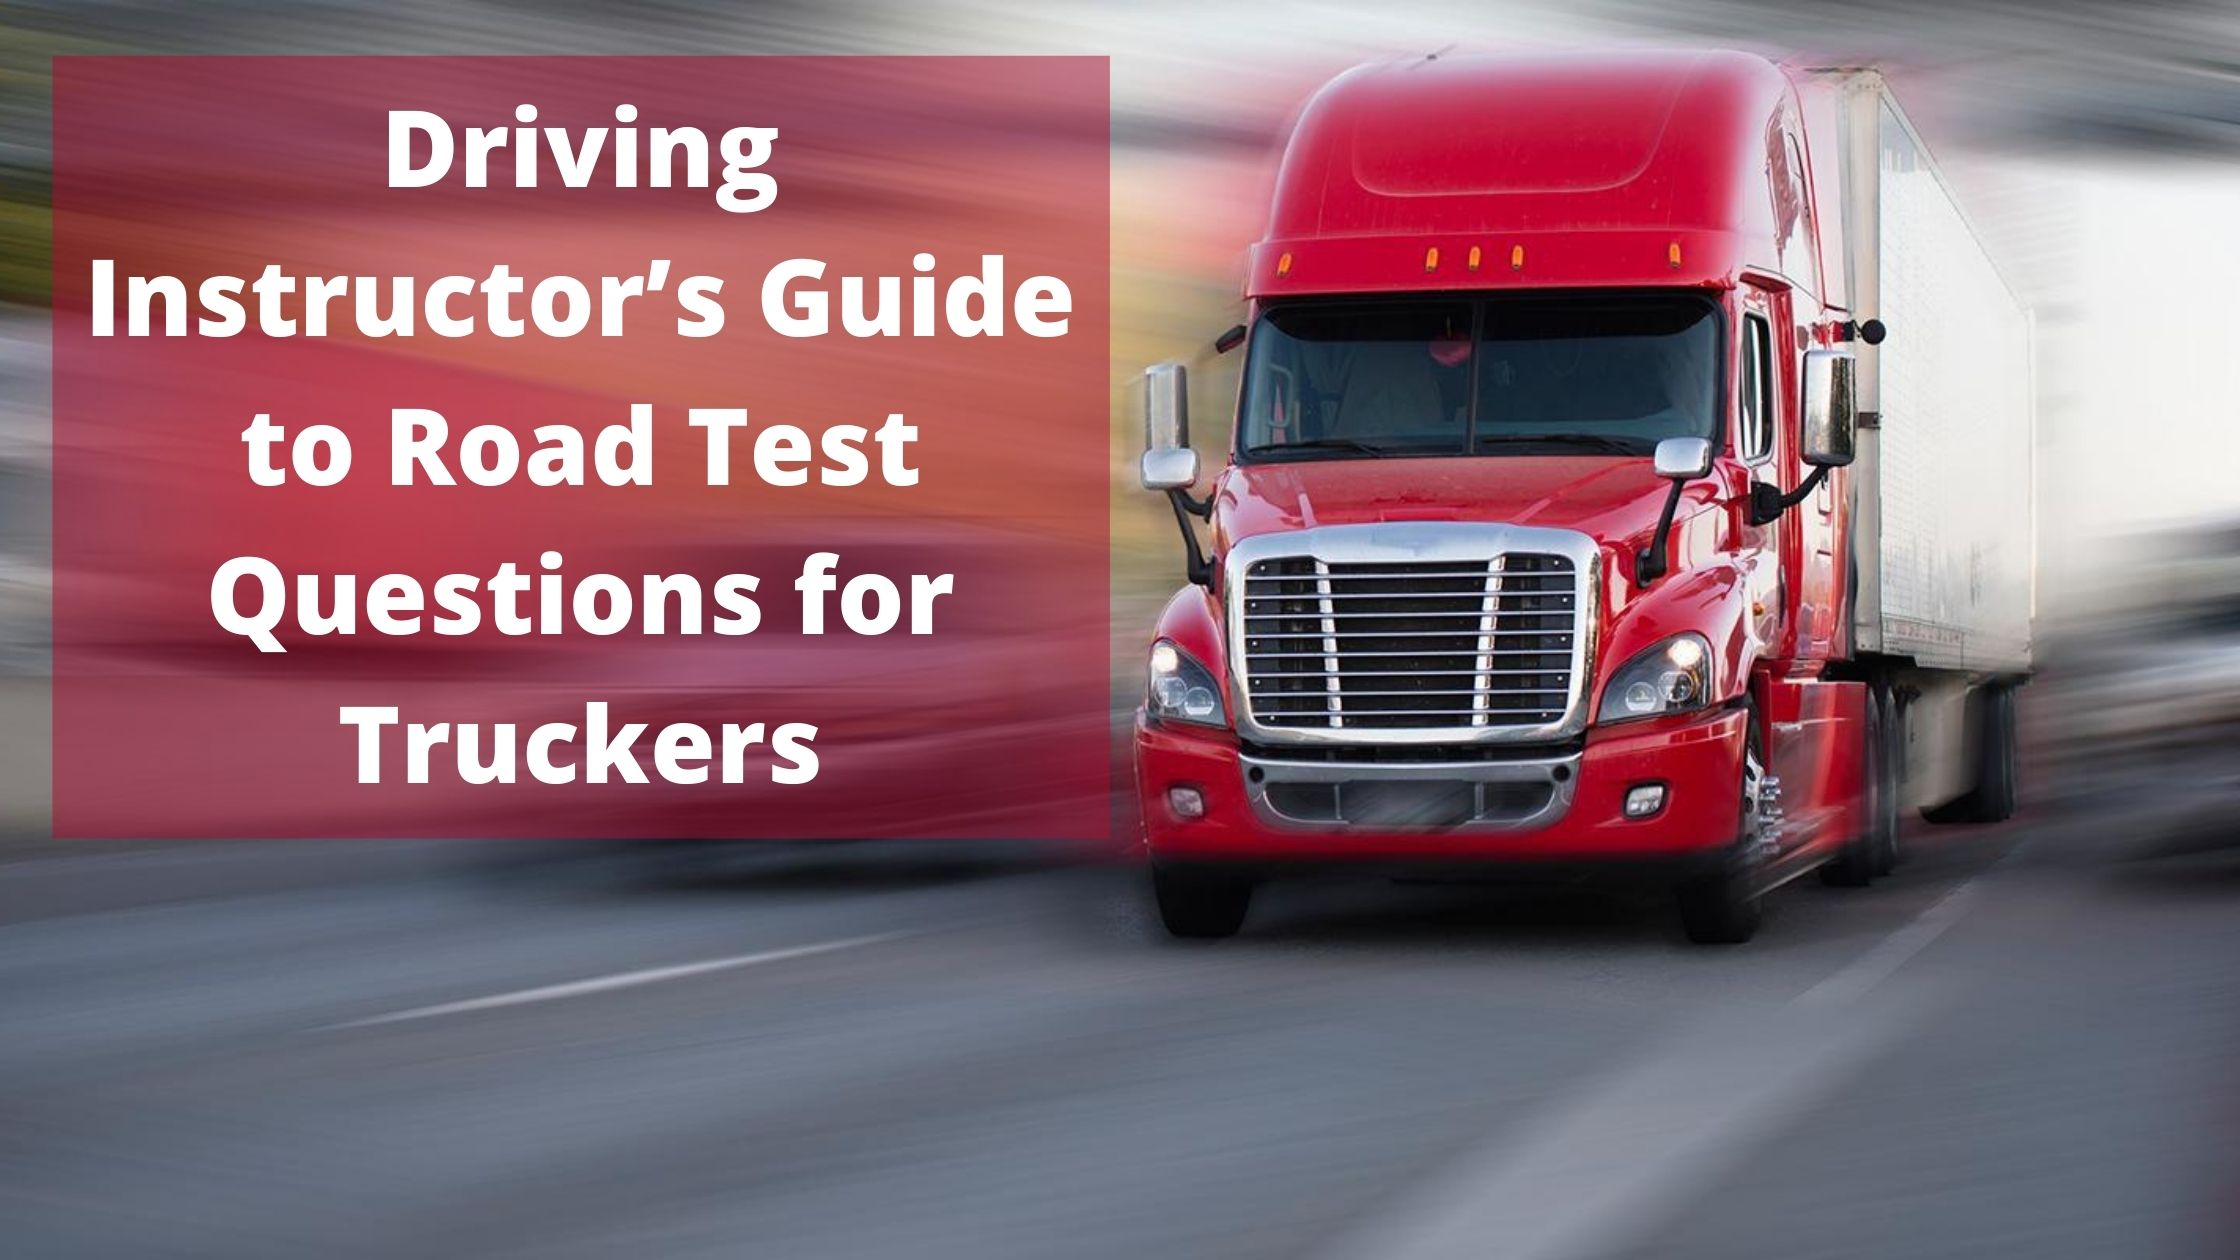 Driving Instructor’s Guide to Road Test Questions for Truckers